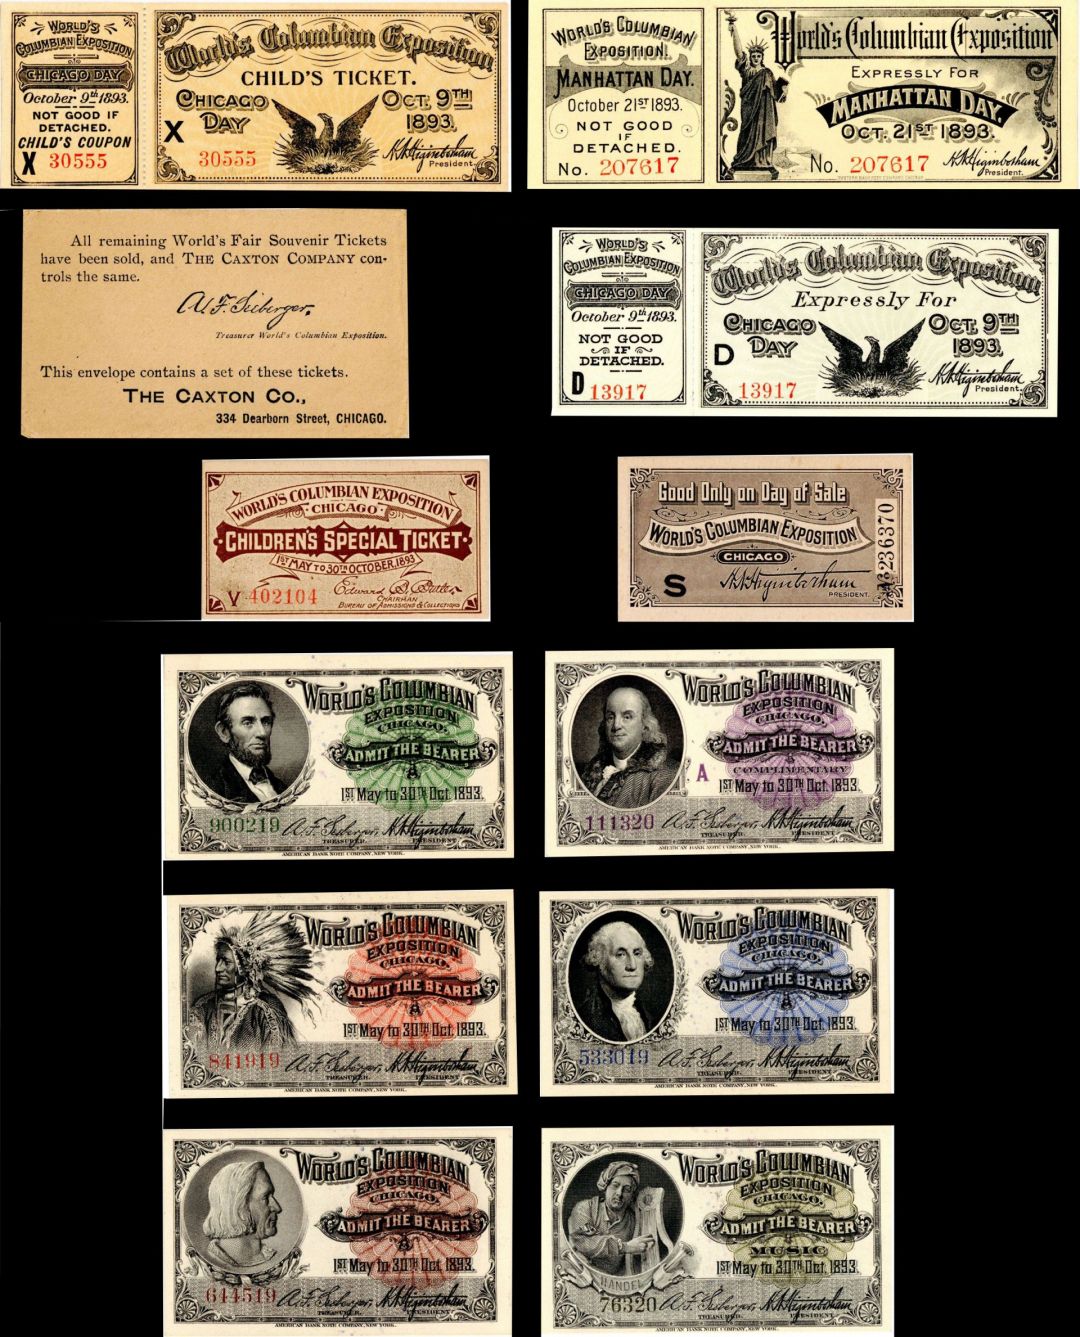 Collection of 12 World's Columbian Exposition Tickets - World's Fair - Very Tough to Find These Days